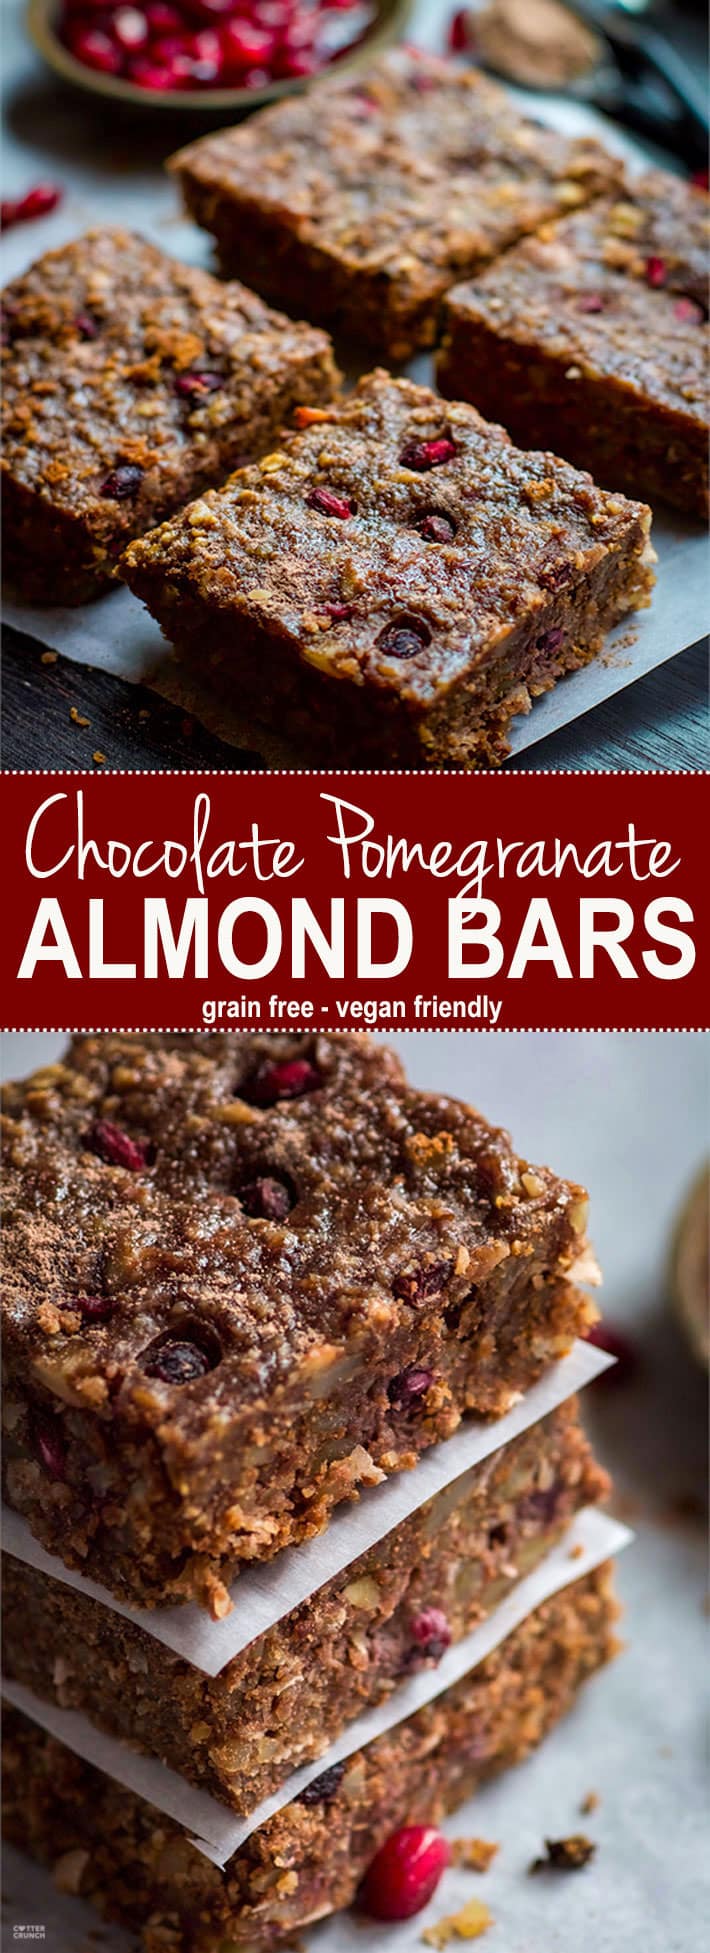 Gluten Free Chocolate Almond Bars with Pomegranate! Oh heavens yes! A Vegan friendly and Gluten Free Chocolate Bar you can have for breakfast, snack, or dessert! Packed with Antioxidants (cocoa, almonds, pomegranate) and bursting with flavor. Healthy yet satisfying. www.cottercrunch.com